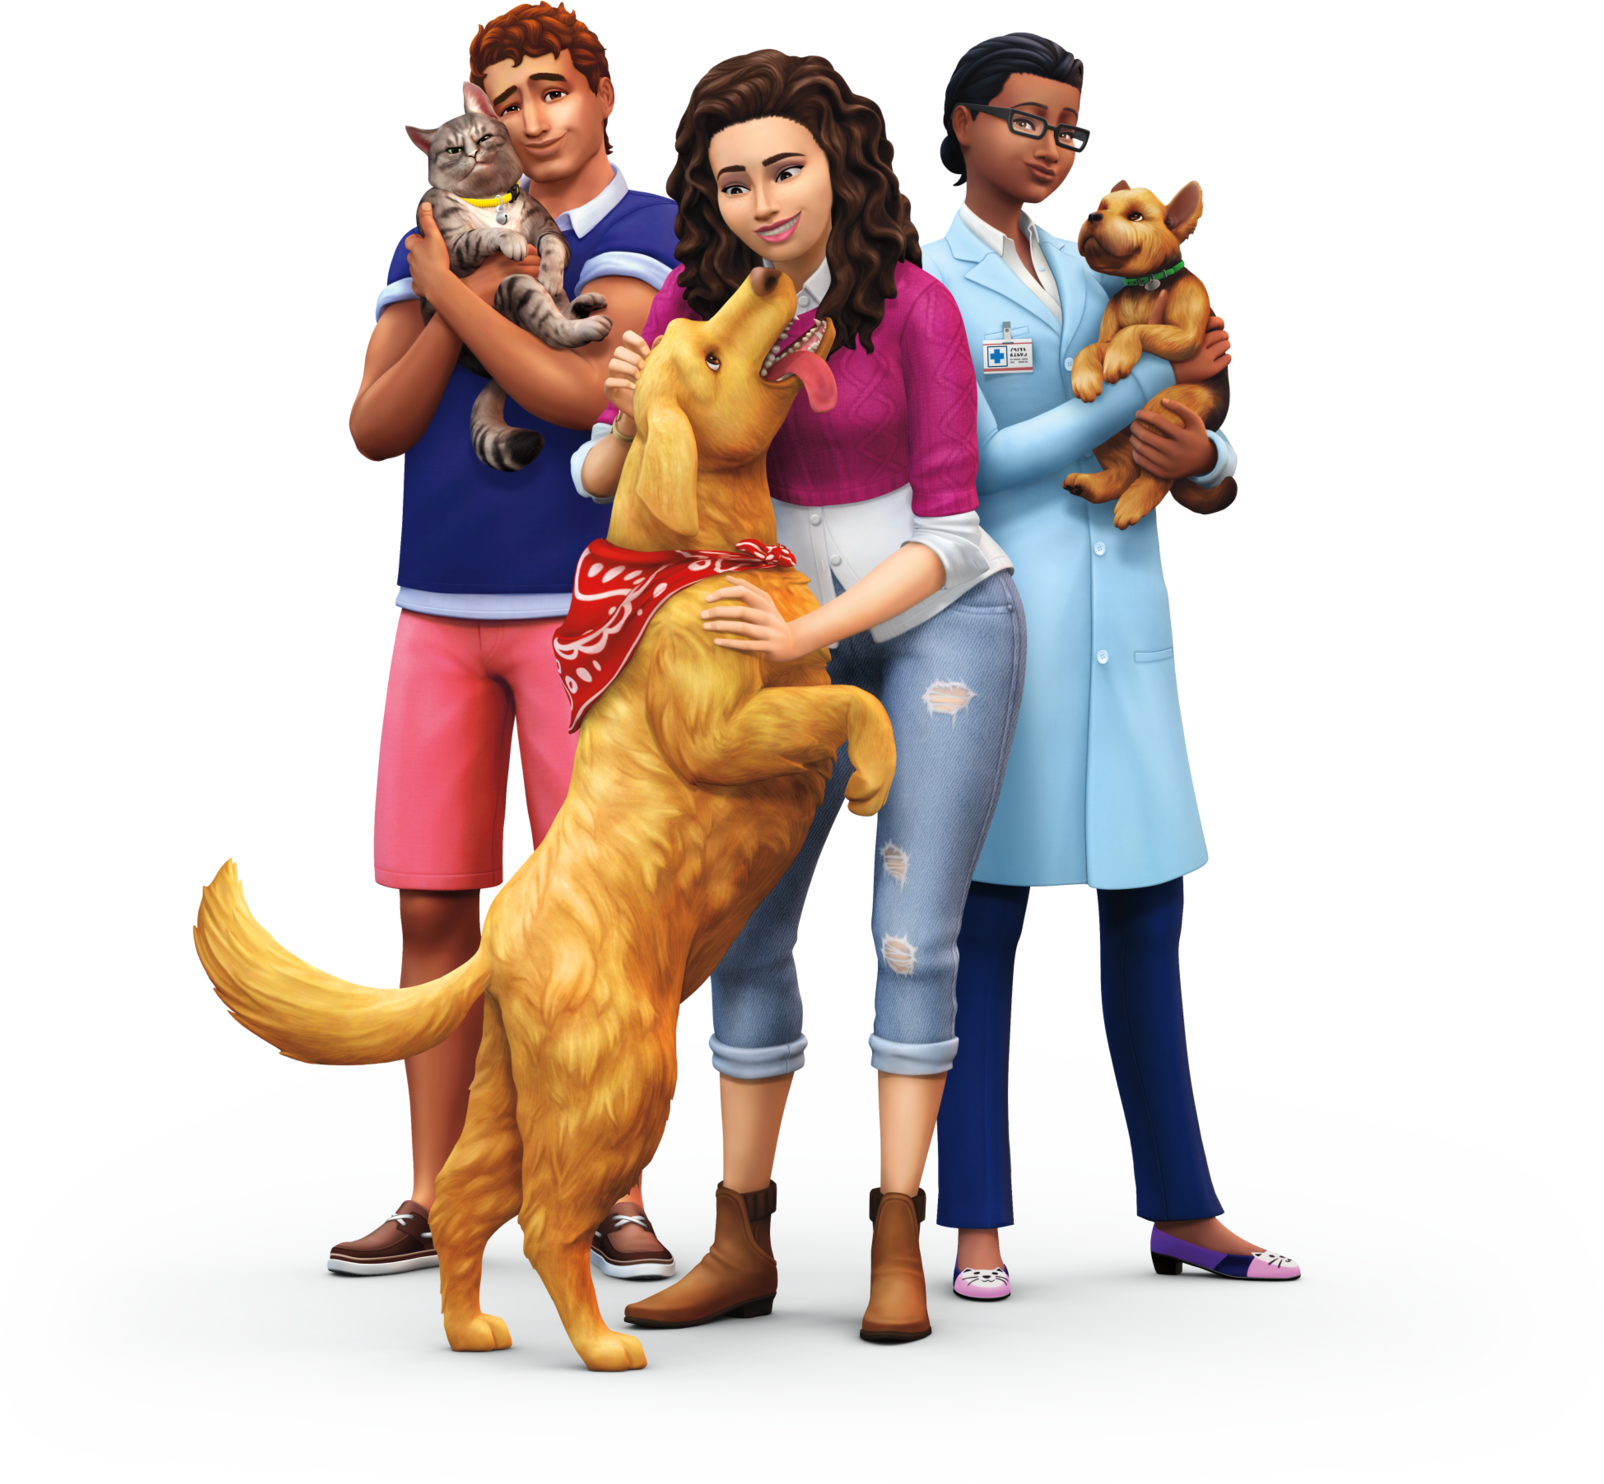 the sims 4 cats and dogs free download origin